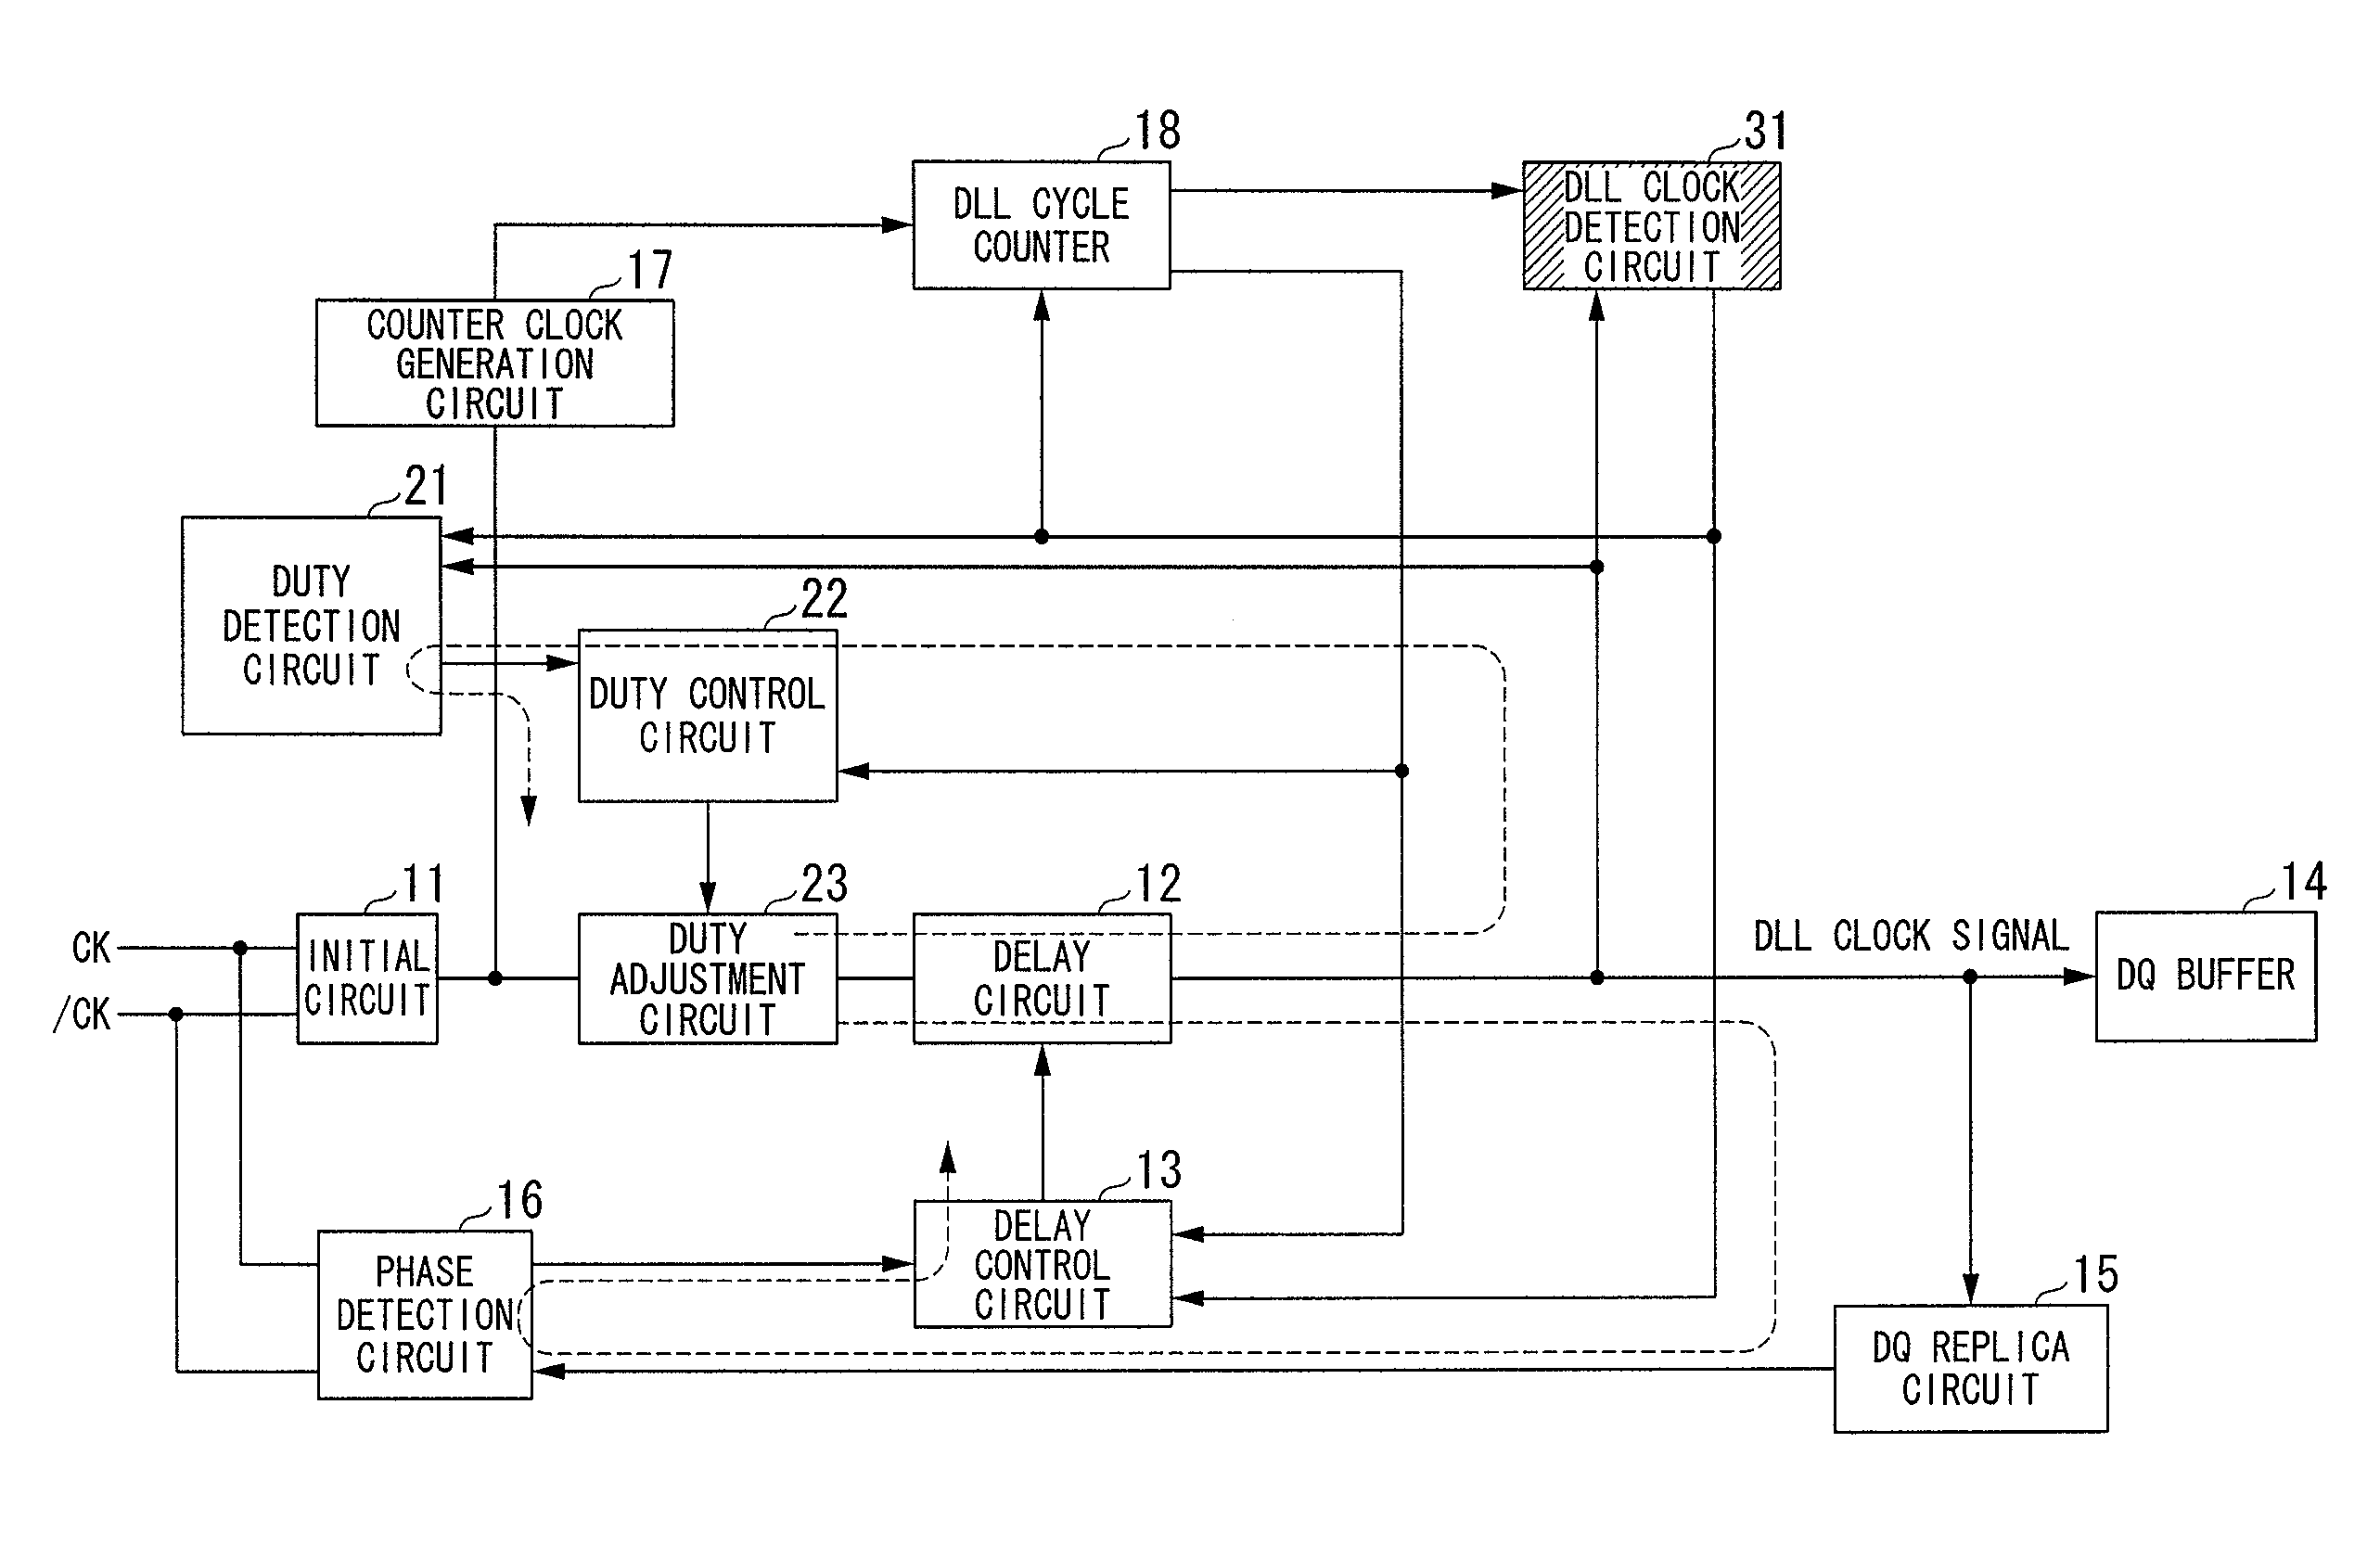 DLL circuit adapted to semiconductor device